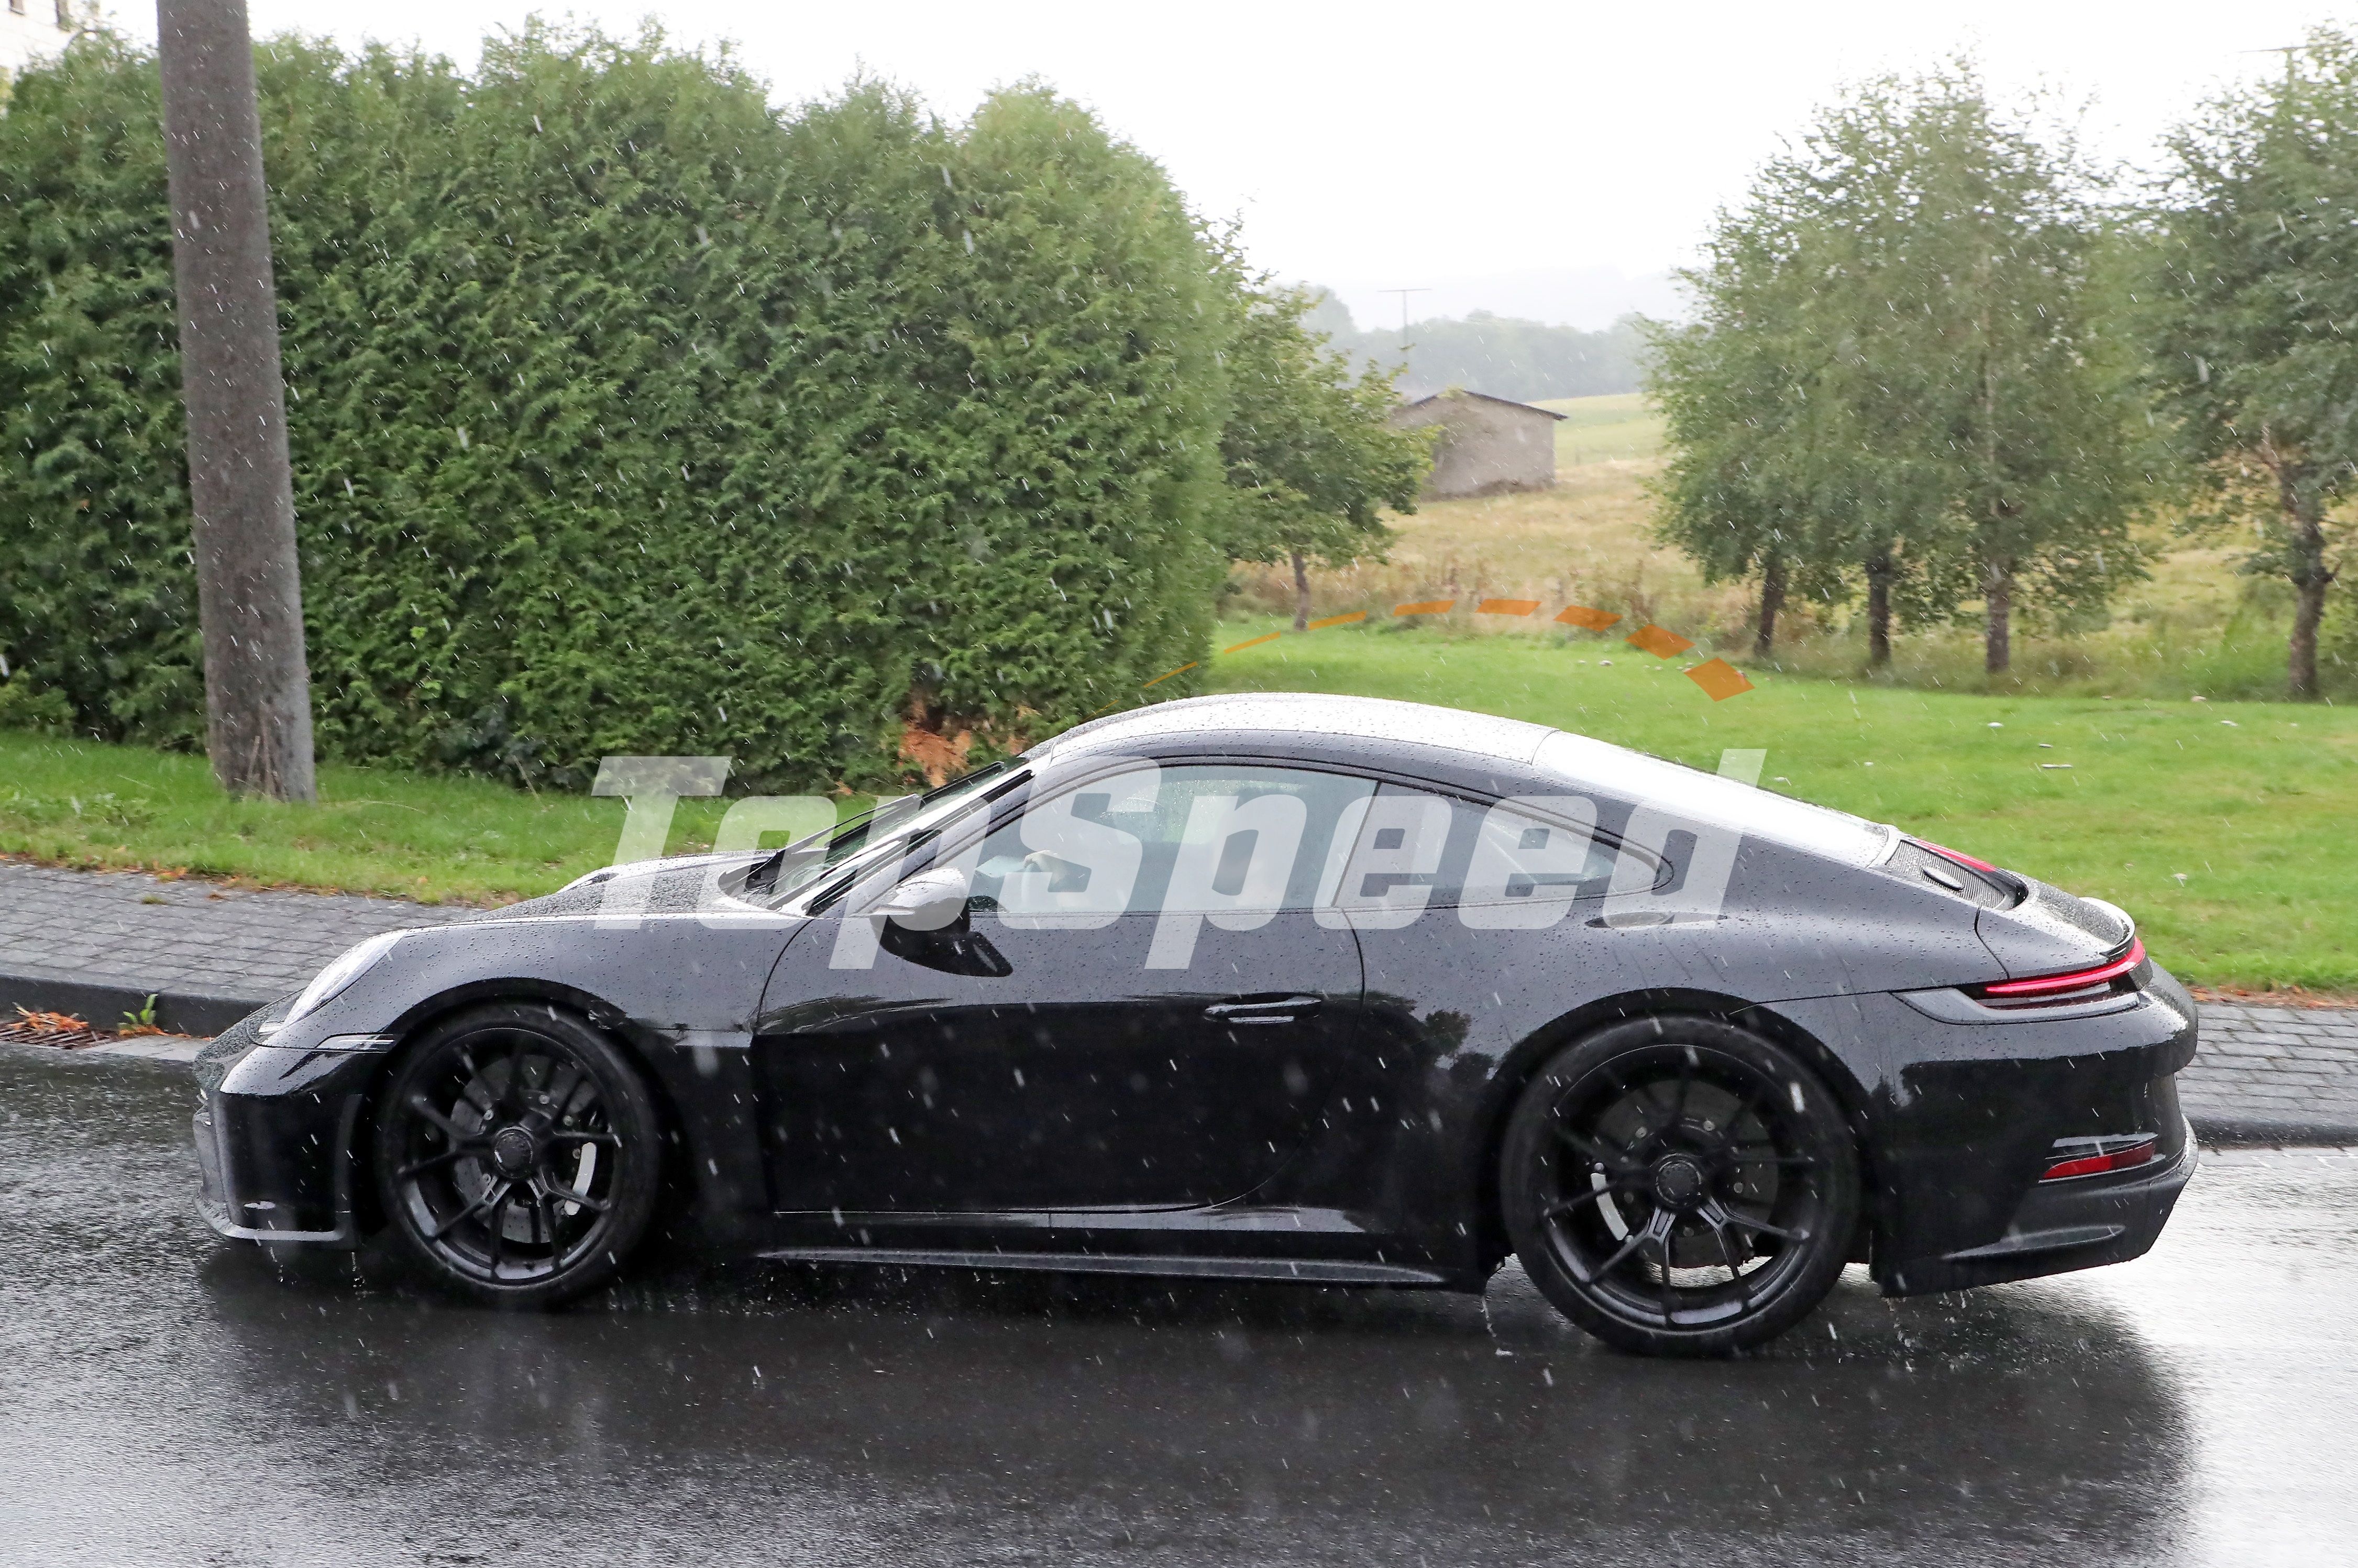 Spy Shots: An Early Look at the 2023 Porsche 911 ST